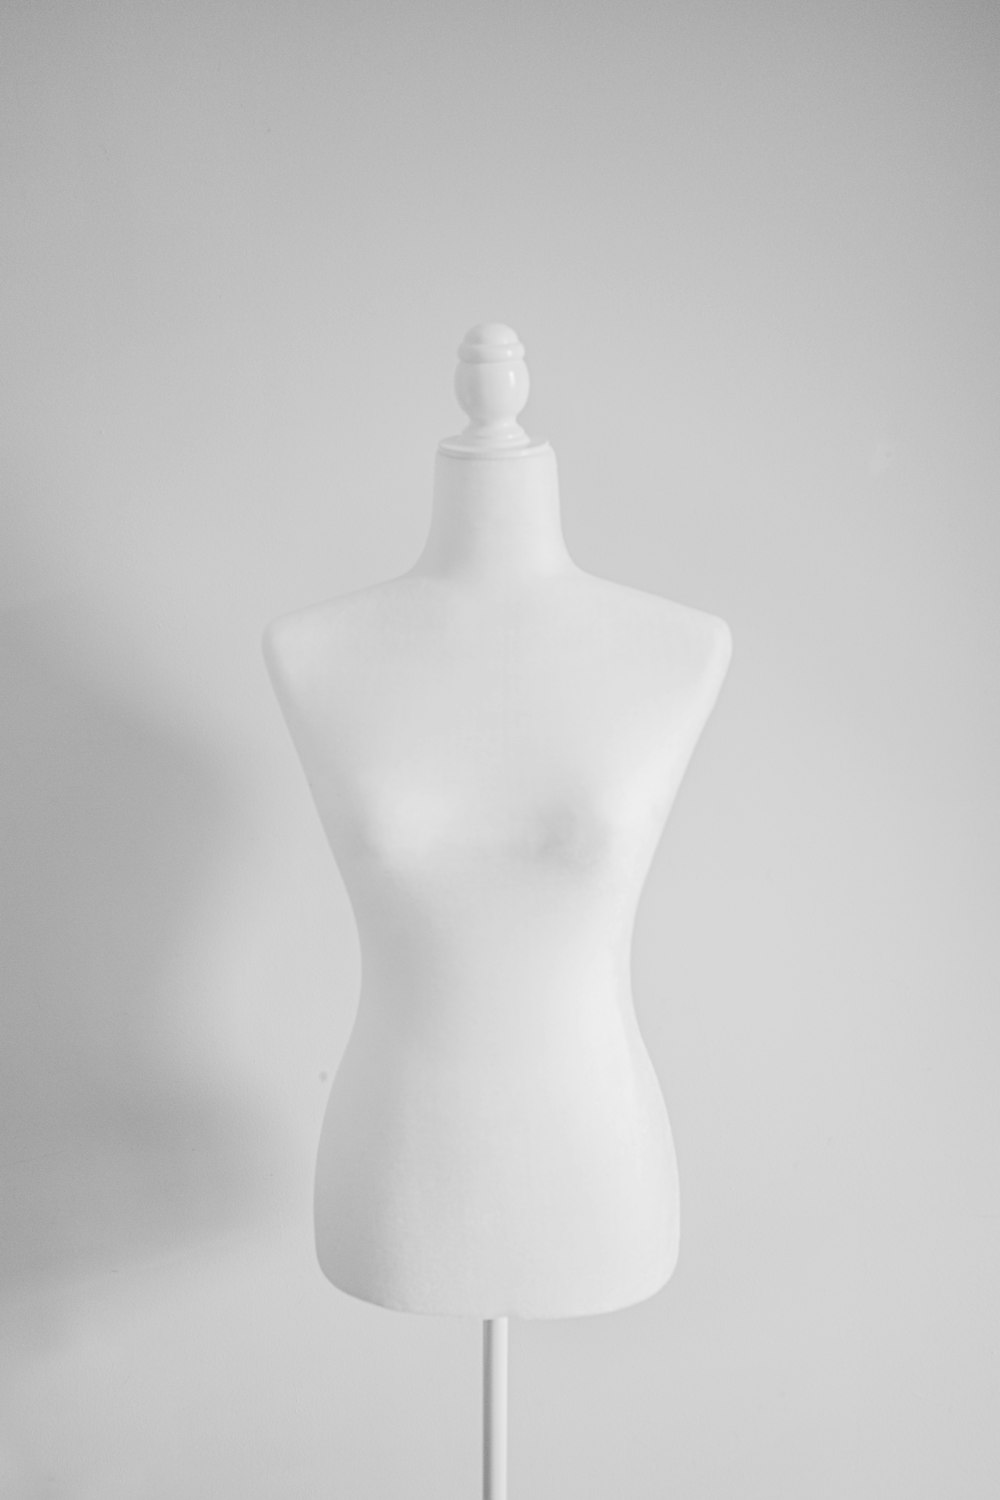 a white female mannequin on a white background